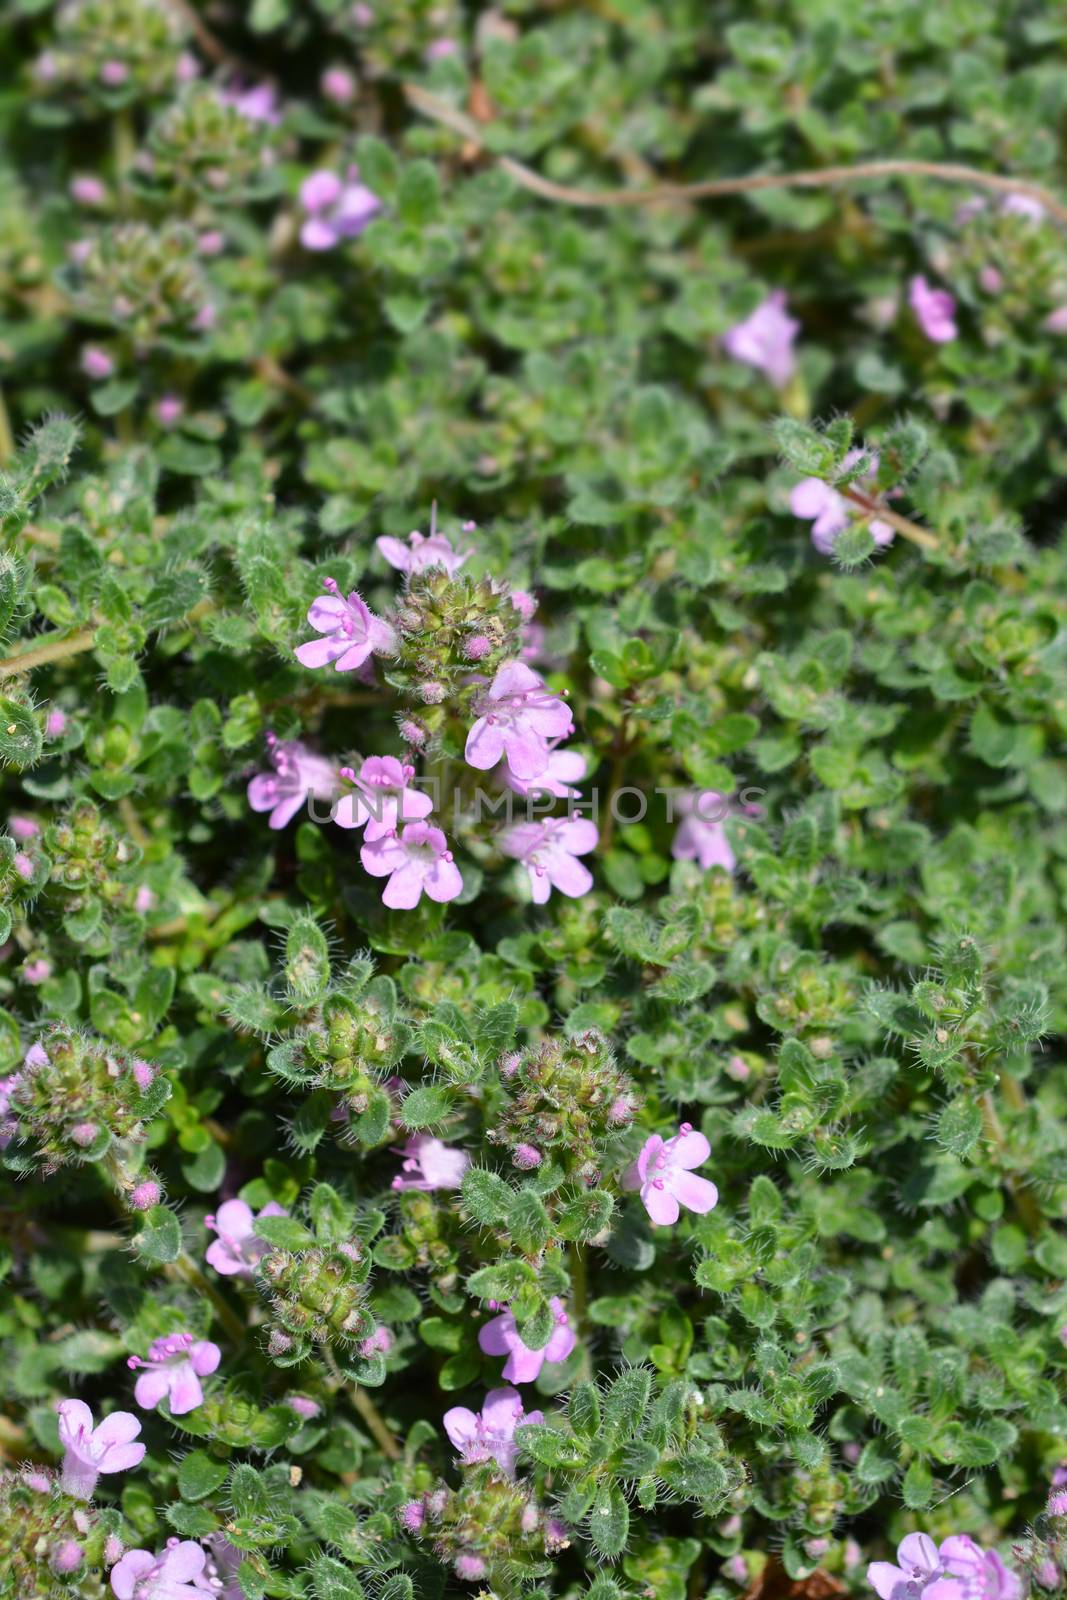 Wild thyme by nahhan